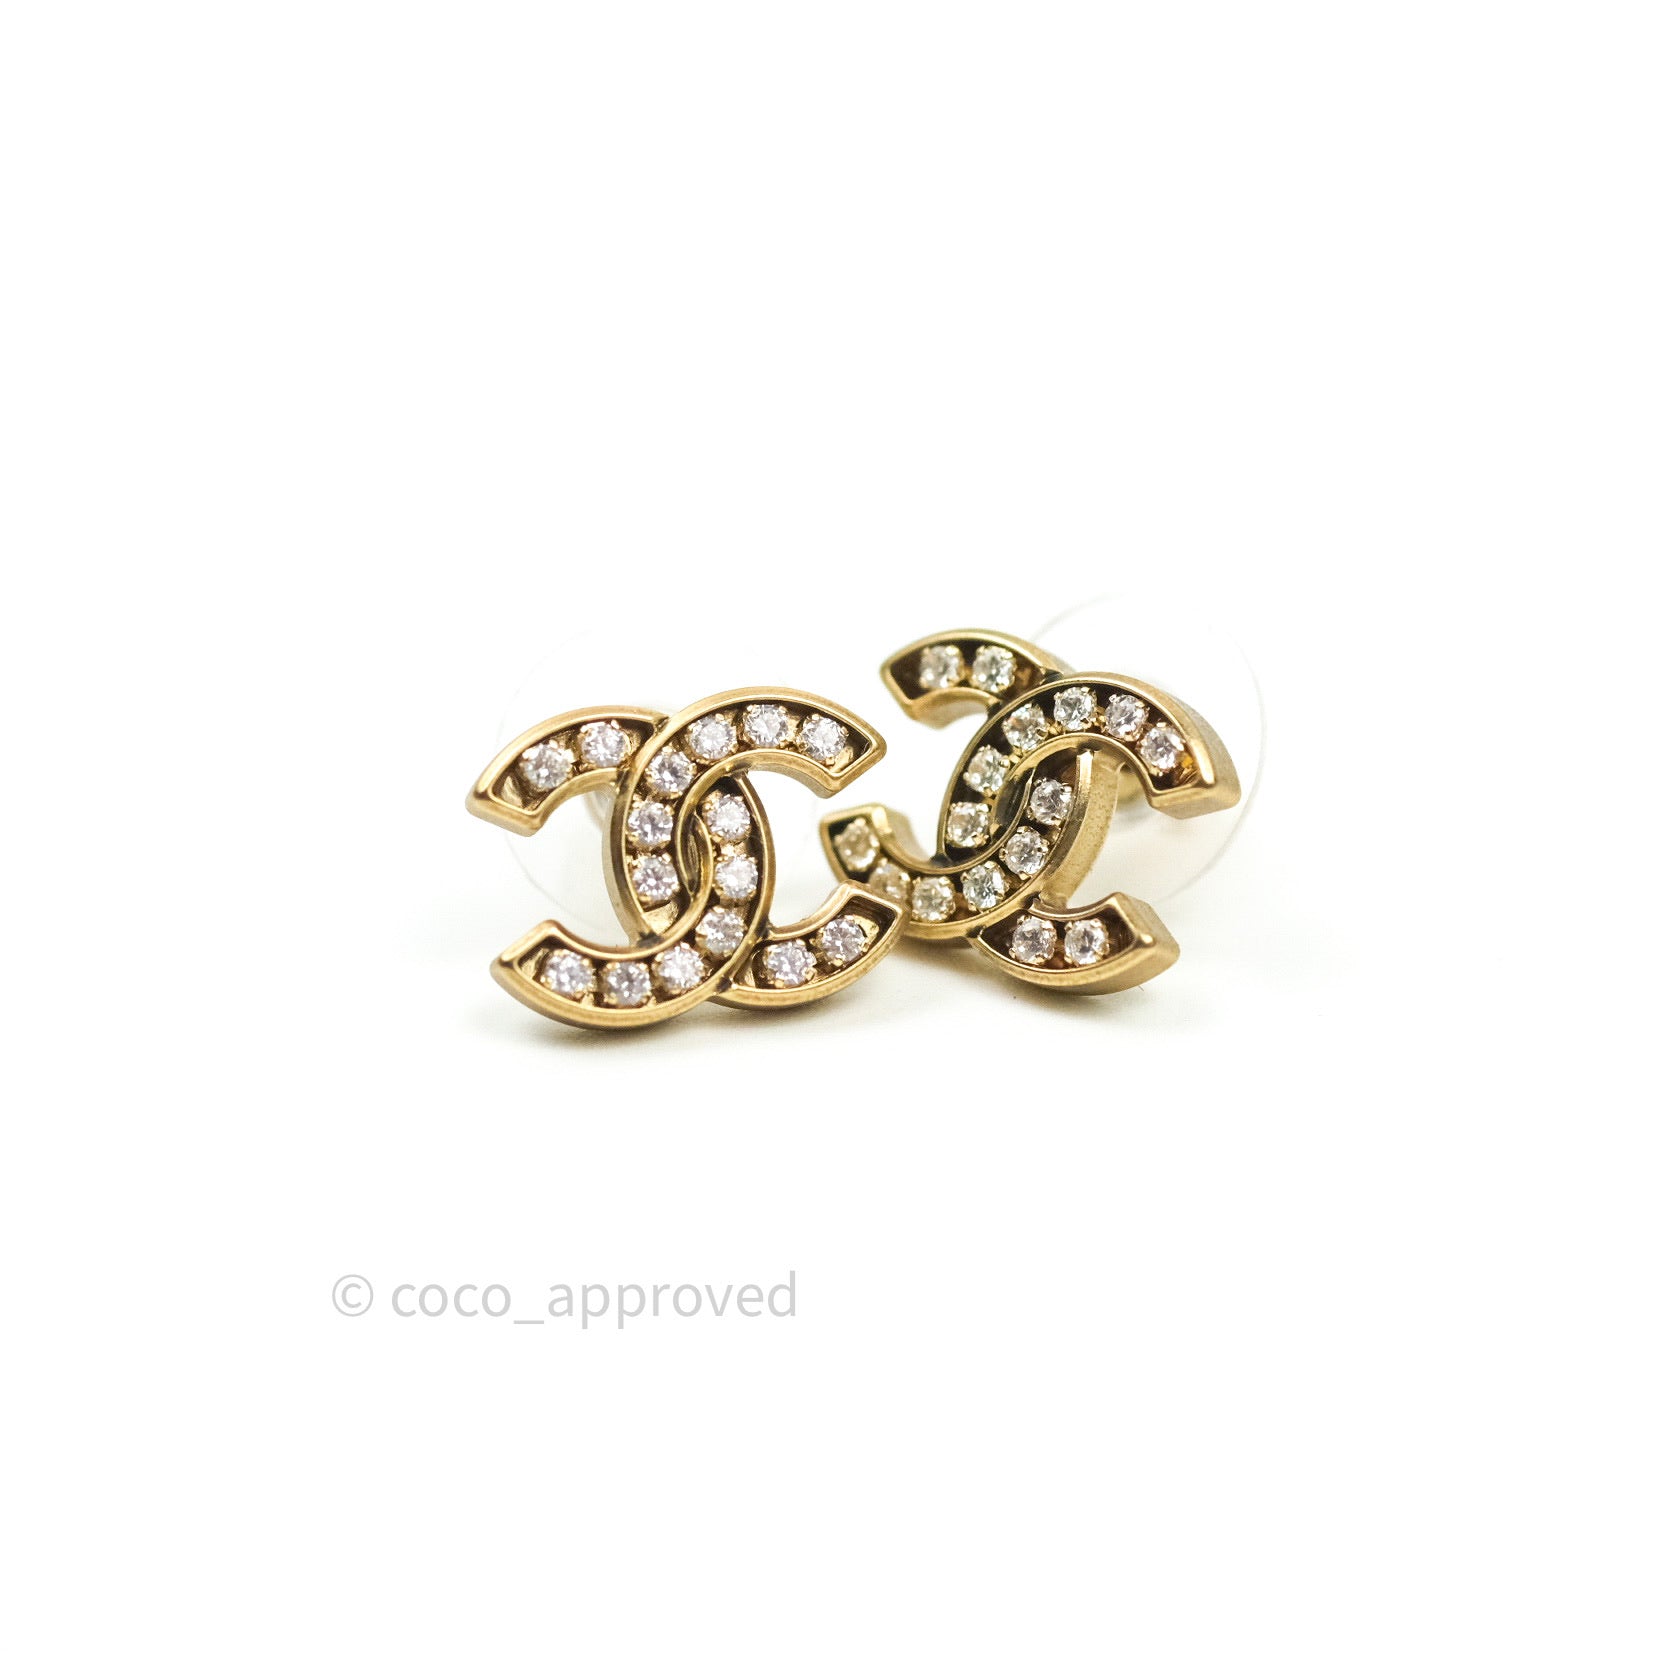 Chanel Crystal CC Earrings Gold Tone 21C – Coco Approved Studio